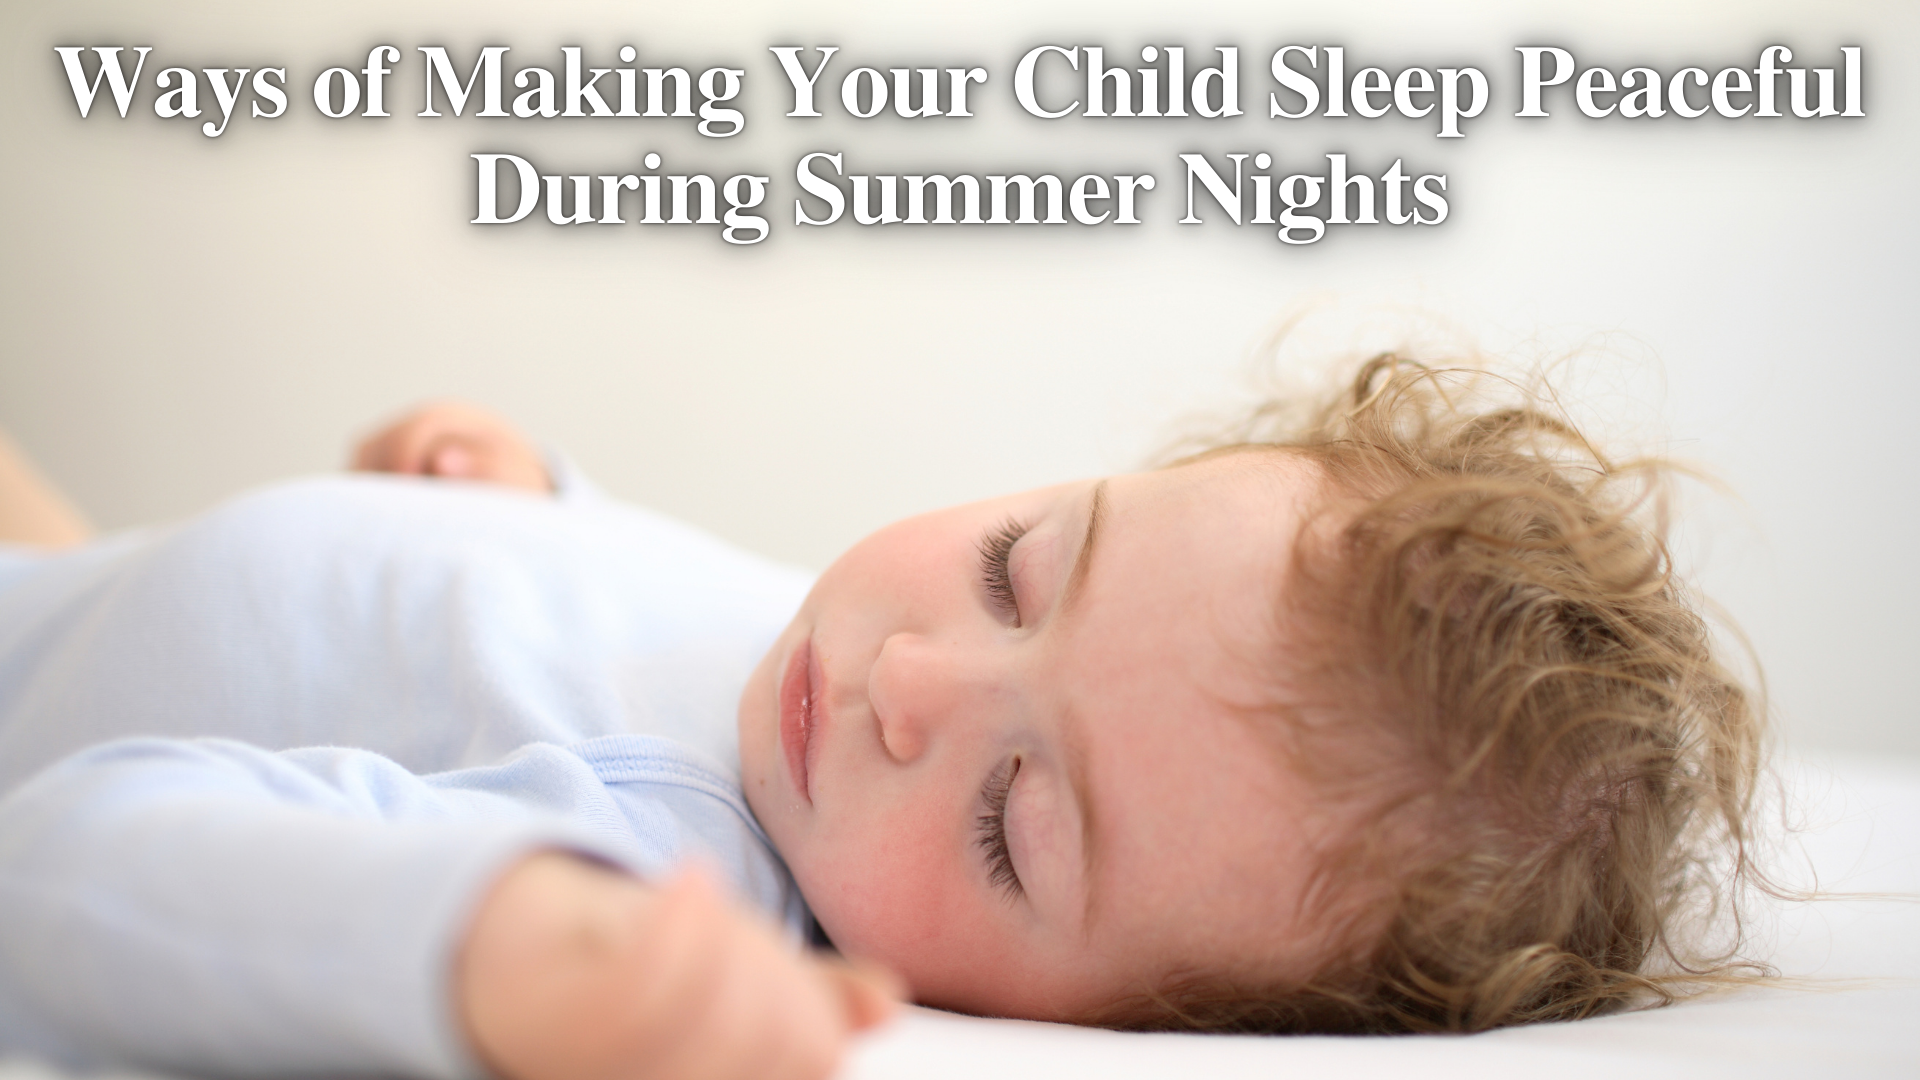 Ways of Making Your Child Sleep Peaceful During Summer Nights